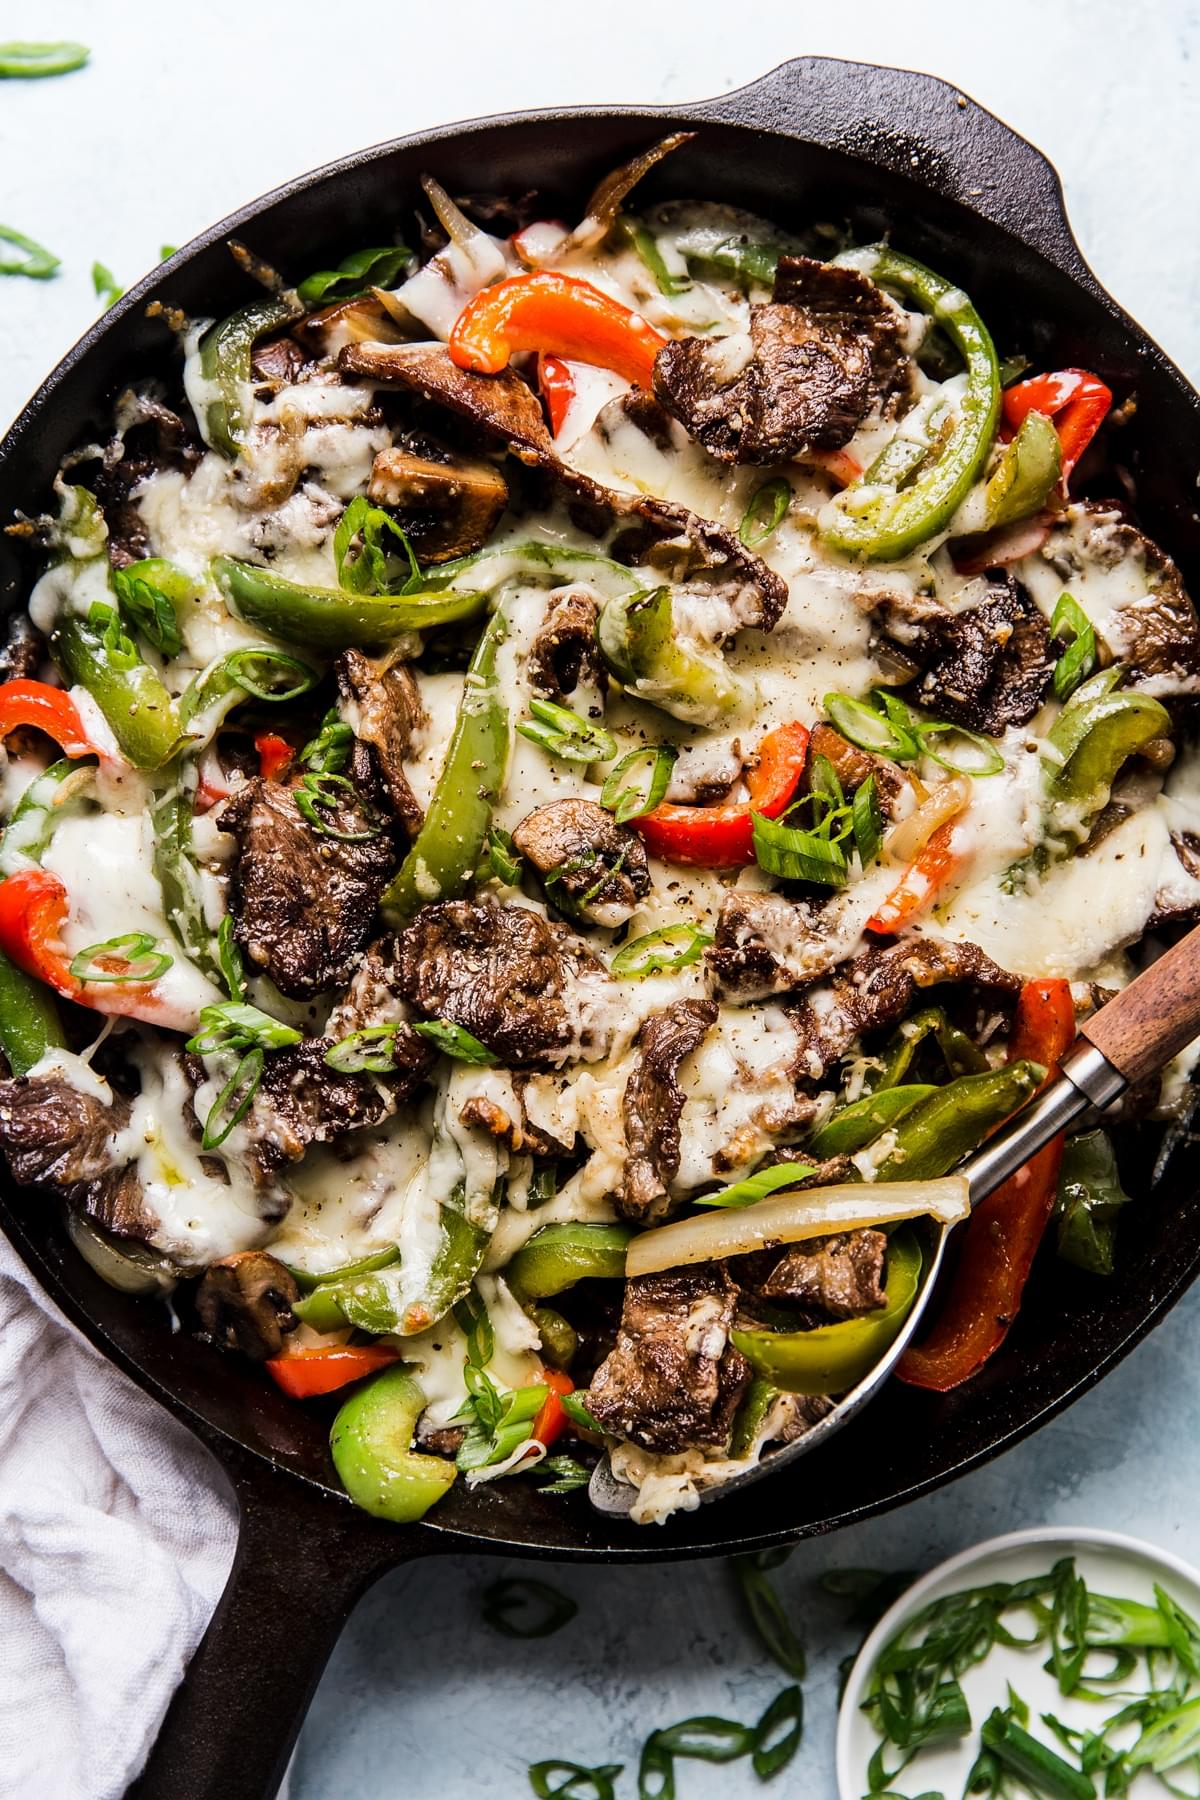 Philly Cheese Steak Skillet in a cast iron skillet with onions, mushrooms, bell peppers and cheese.